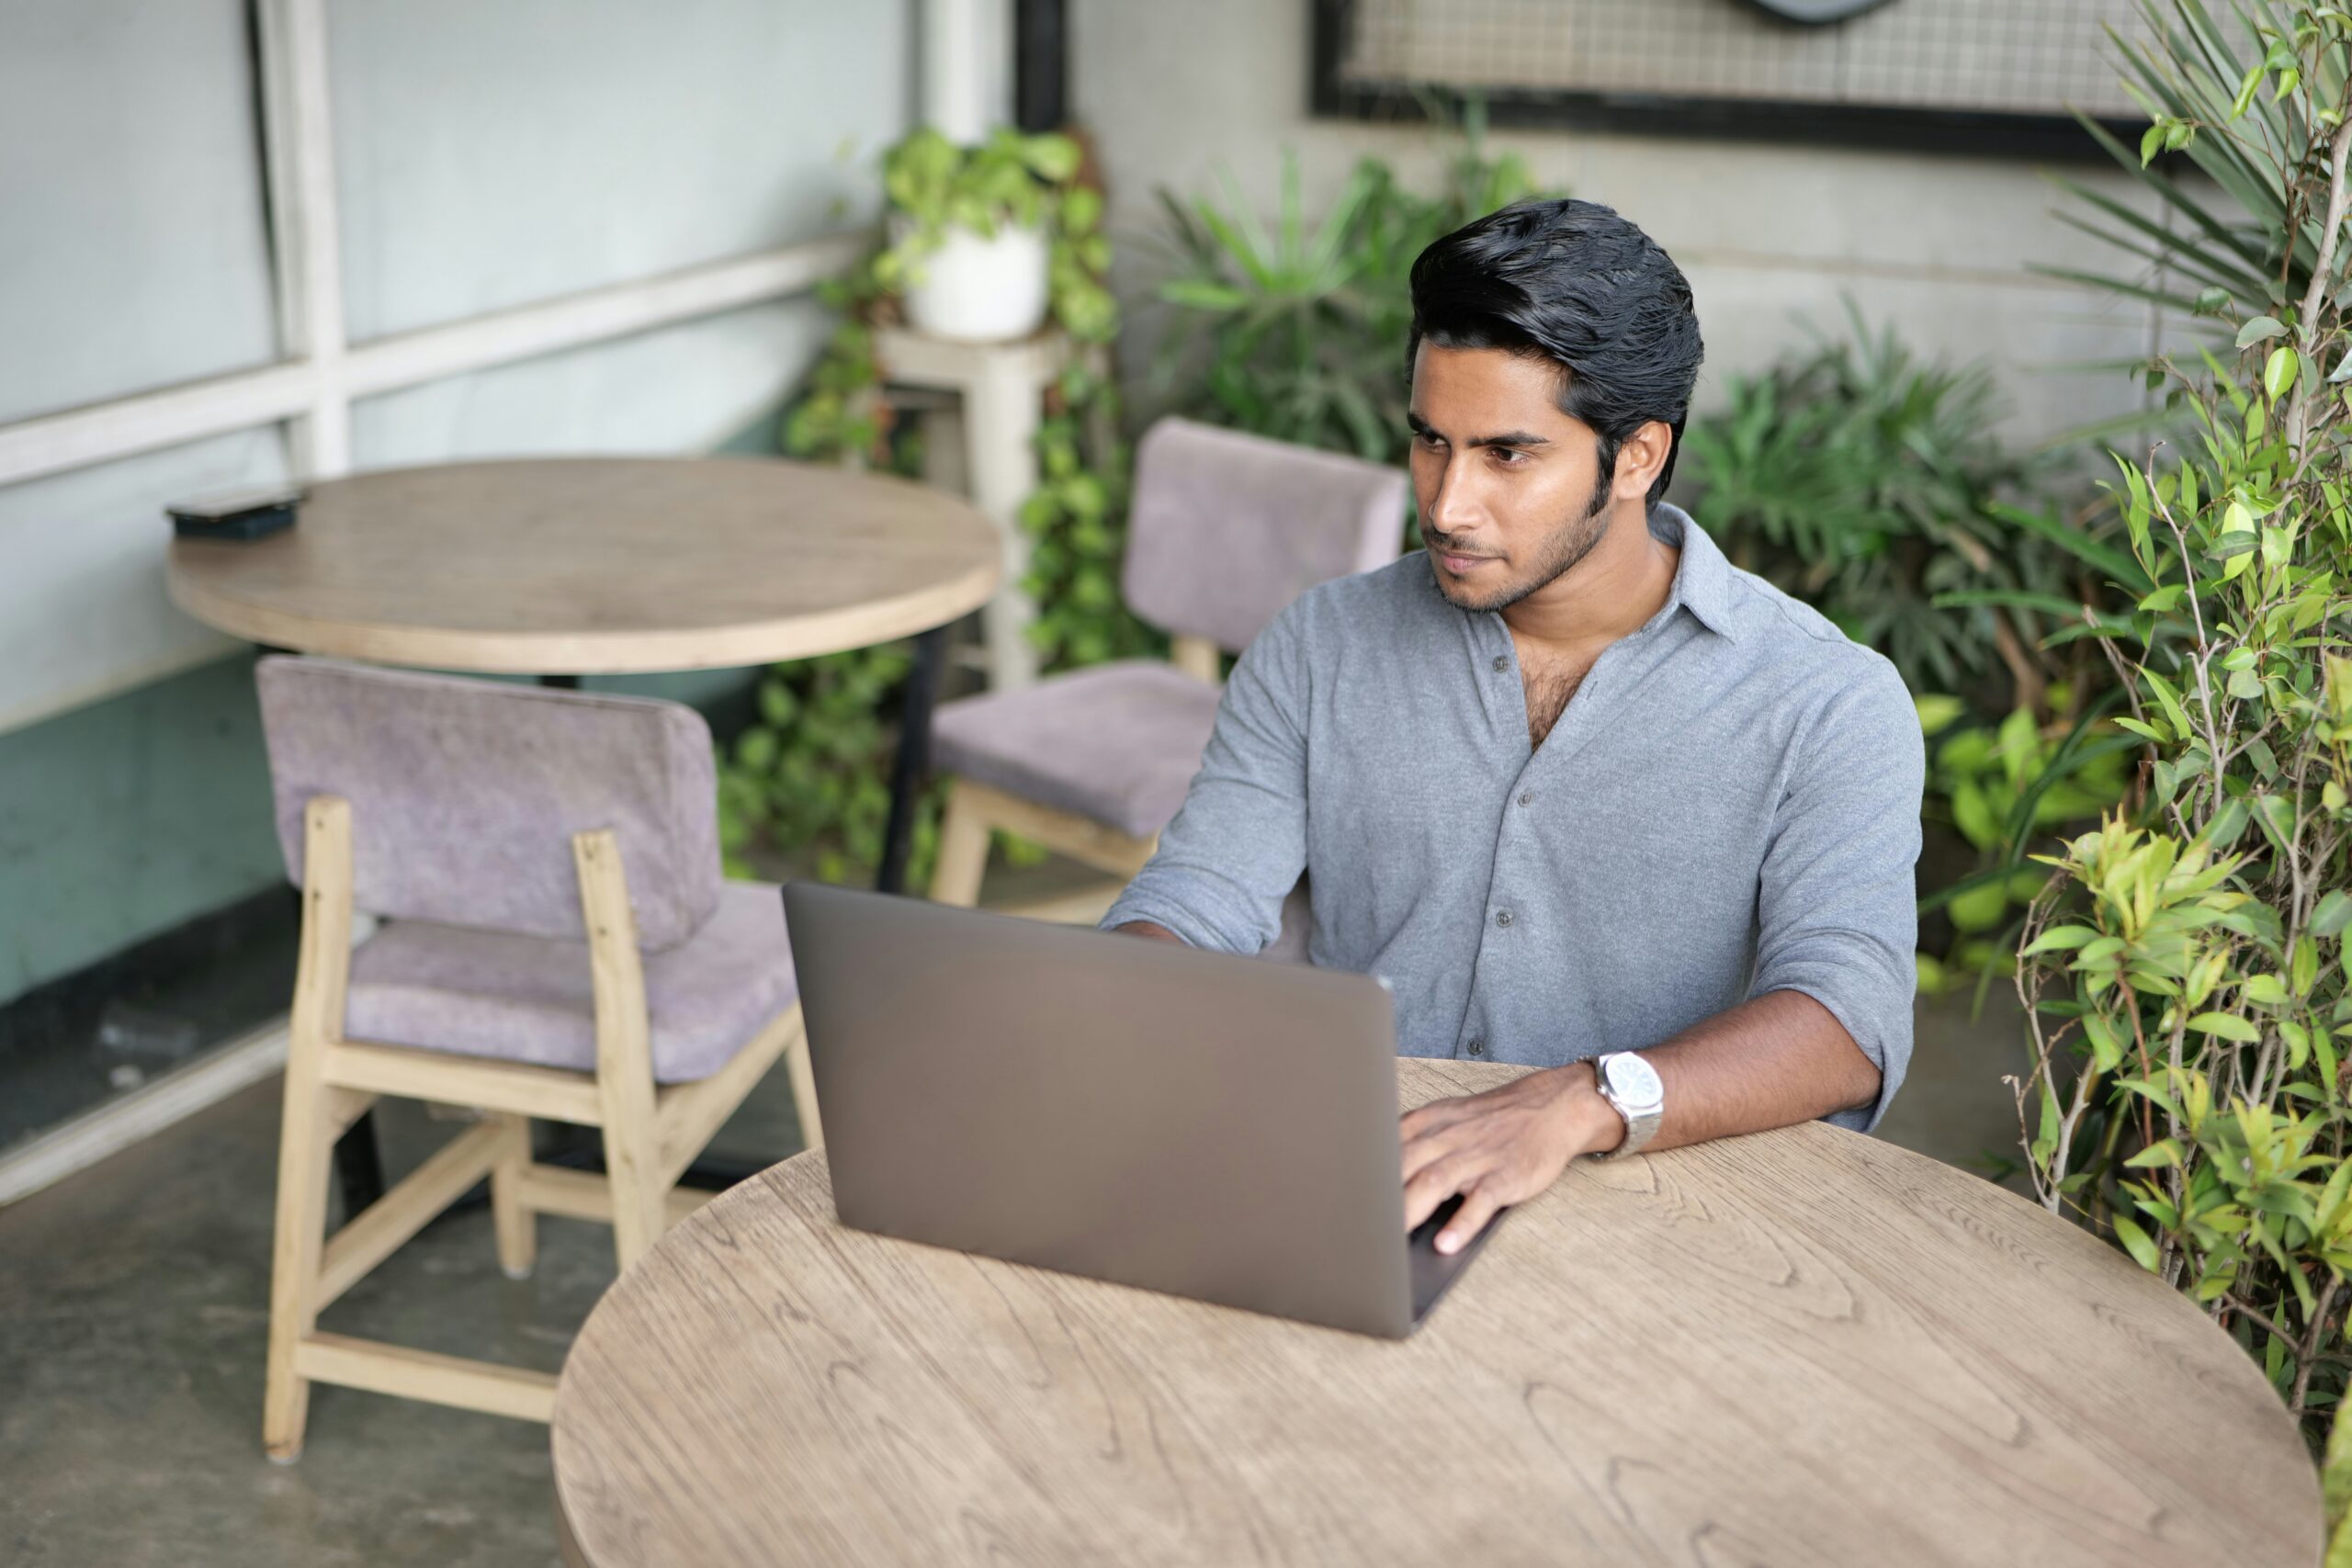 A person is working on a laptop at an outdoor café with wooden tables and green plants in the background, researching how to automate your business processes.